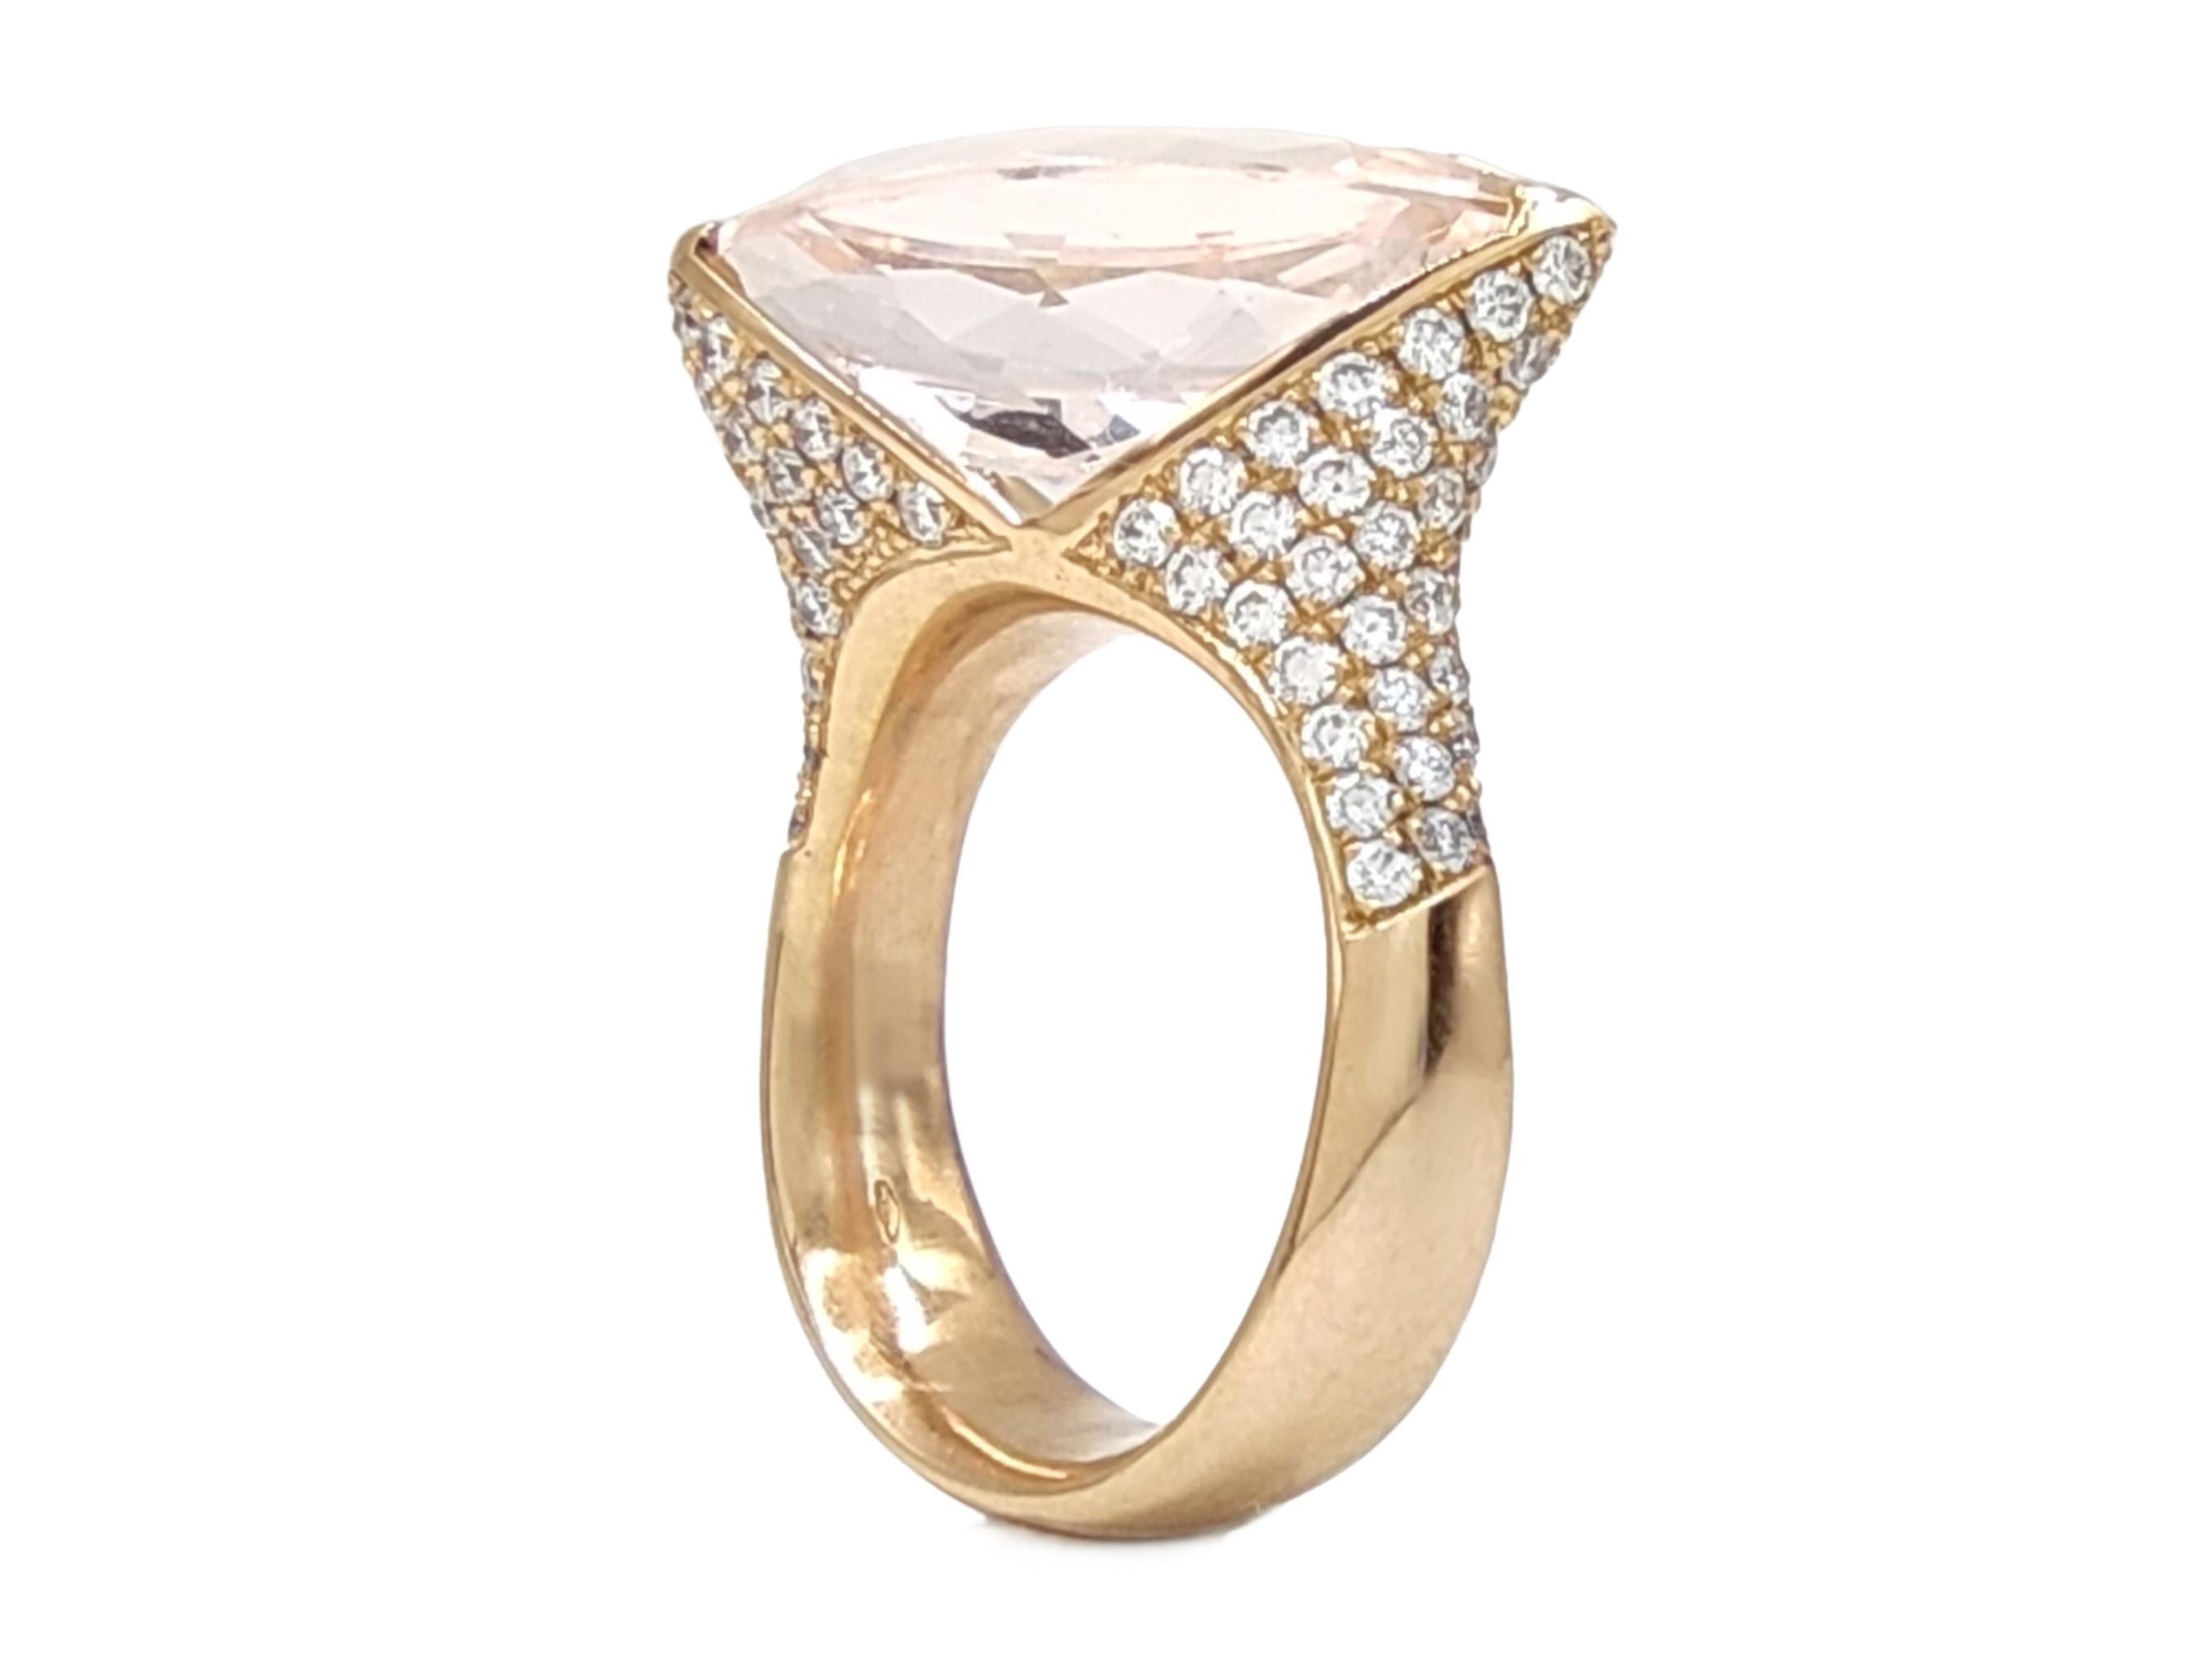 Precious elegant 18 kt rose gold ring handmade.
Size EU : Size 16 Diameter 18 
Total ring weight: 14.8 g Gem
Description: 
1  morganite approx. 4 ct.  translucent pink color of high purity mounted in the air to highlight the beauty of the morganite.